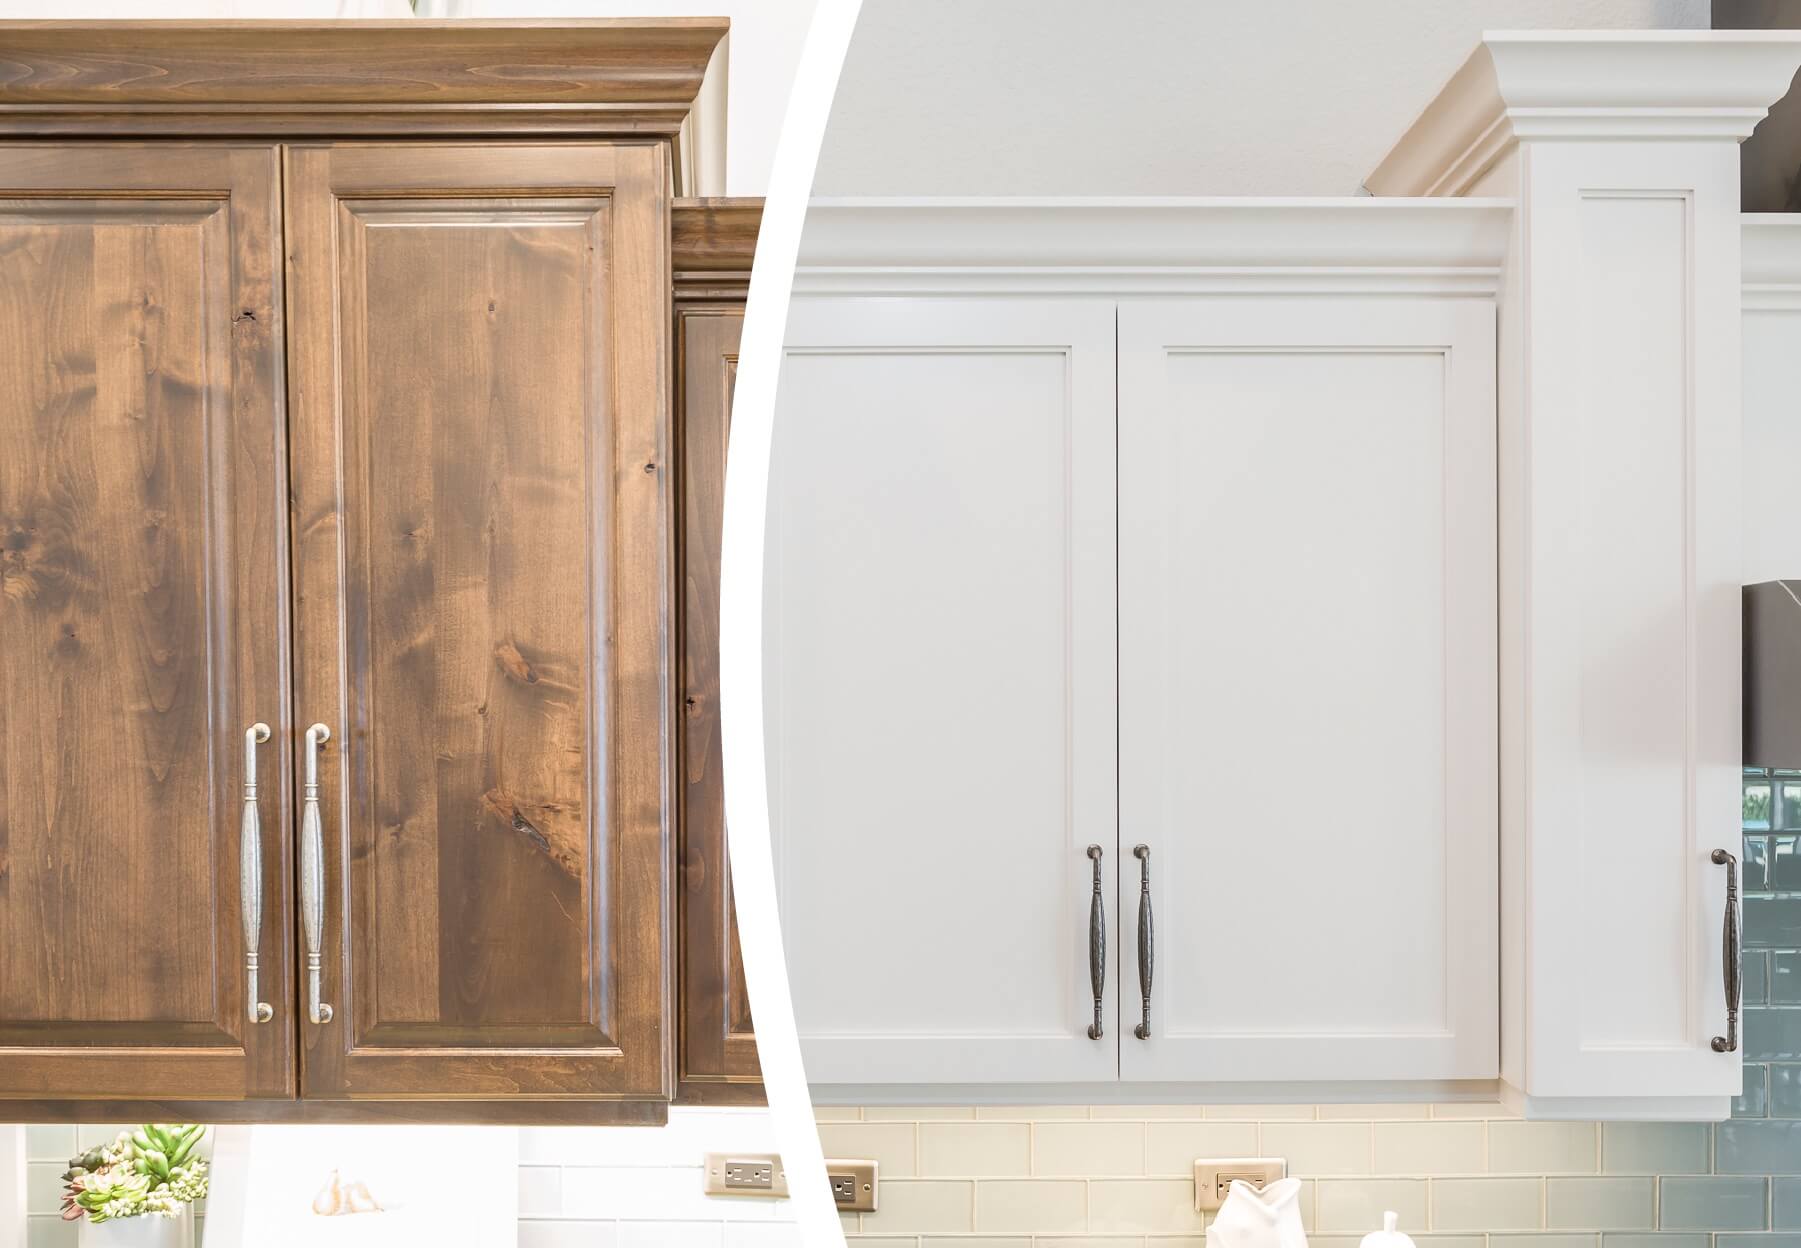 Cabinet Door Replacement N Hance Ontario, Can You Replace Just The Kitchen Cabinet Doors